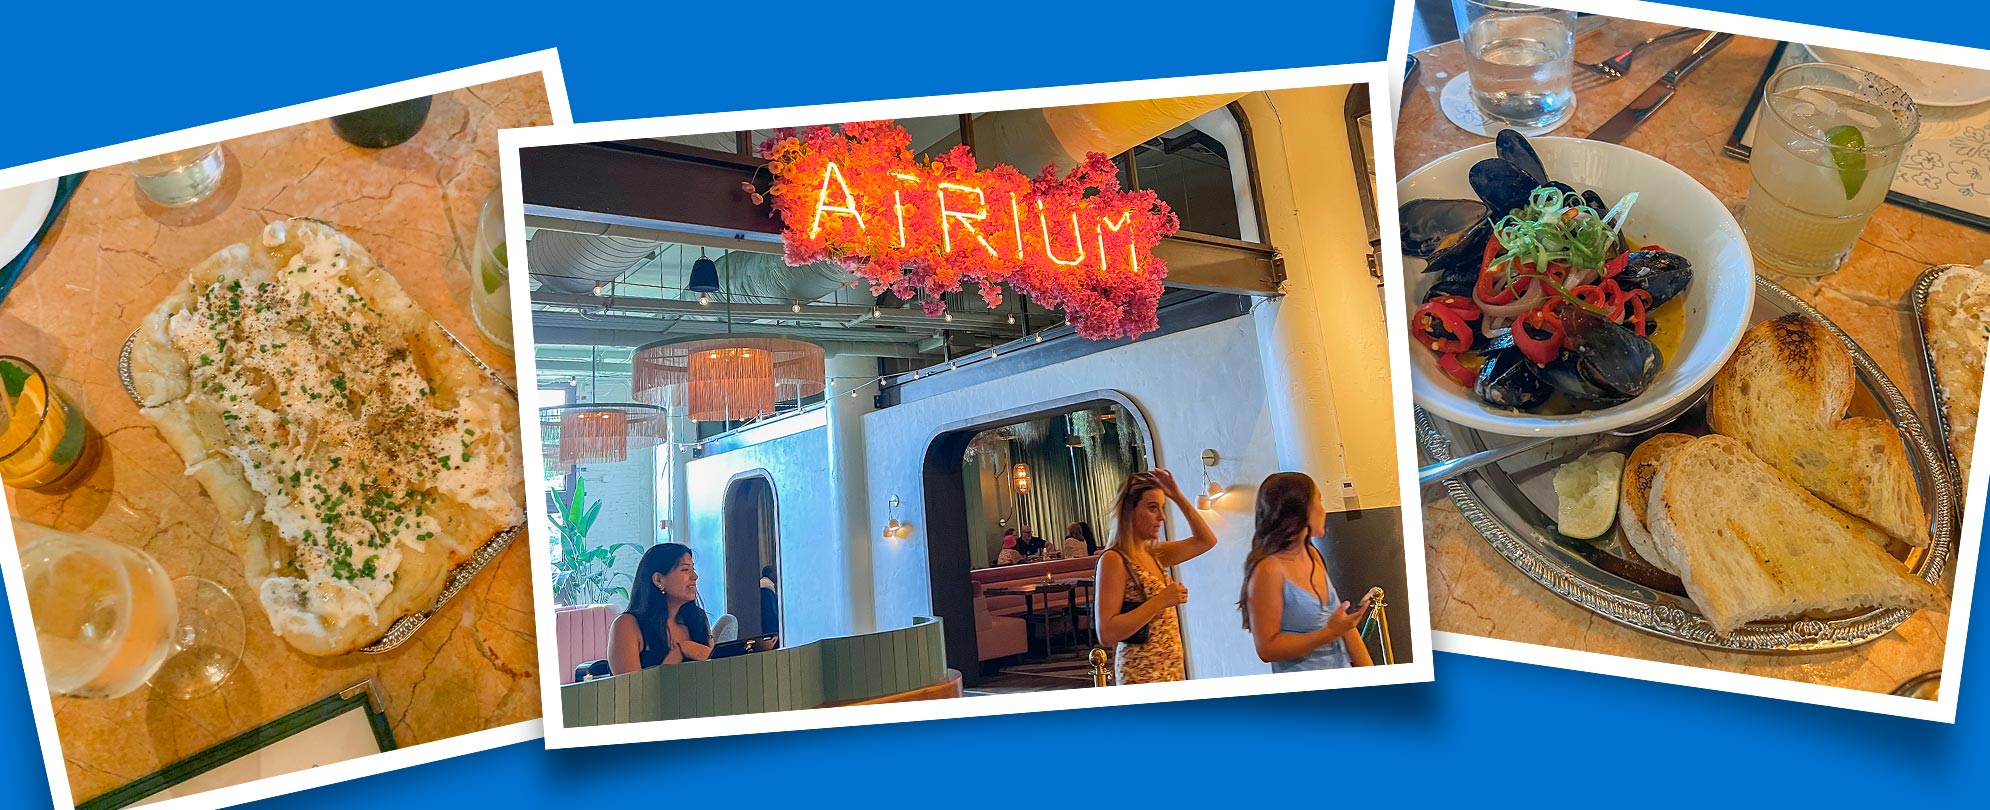 Three snapshots on a blue background showing a goat cheese flatbread dish, two women walking beneath the Atrium restaurant sign, a plate of mussels and grilled bread.